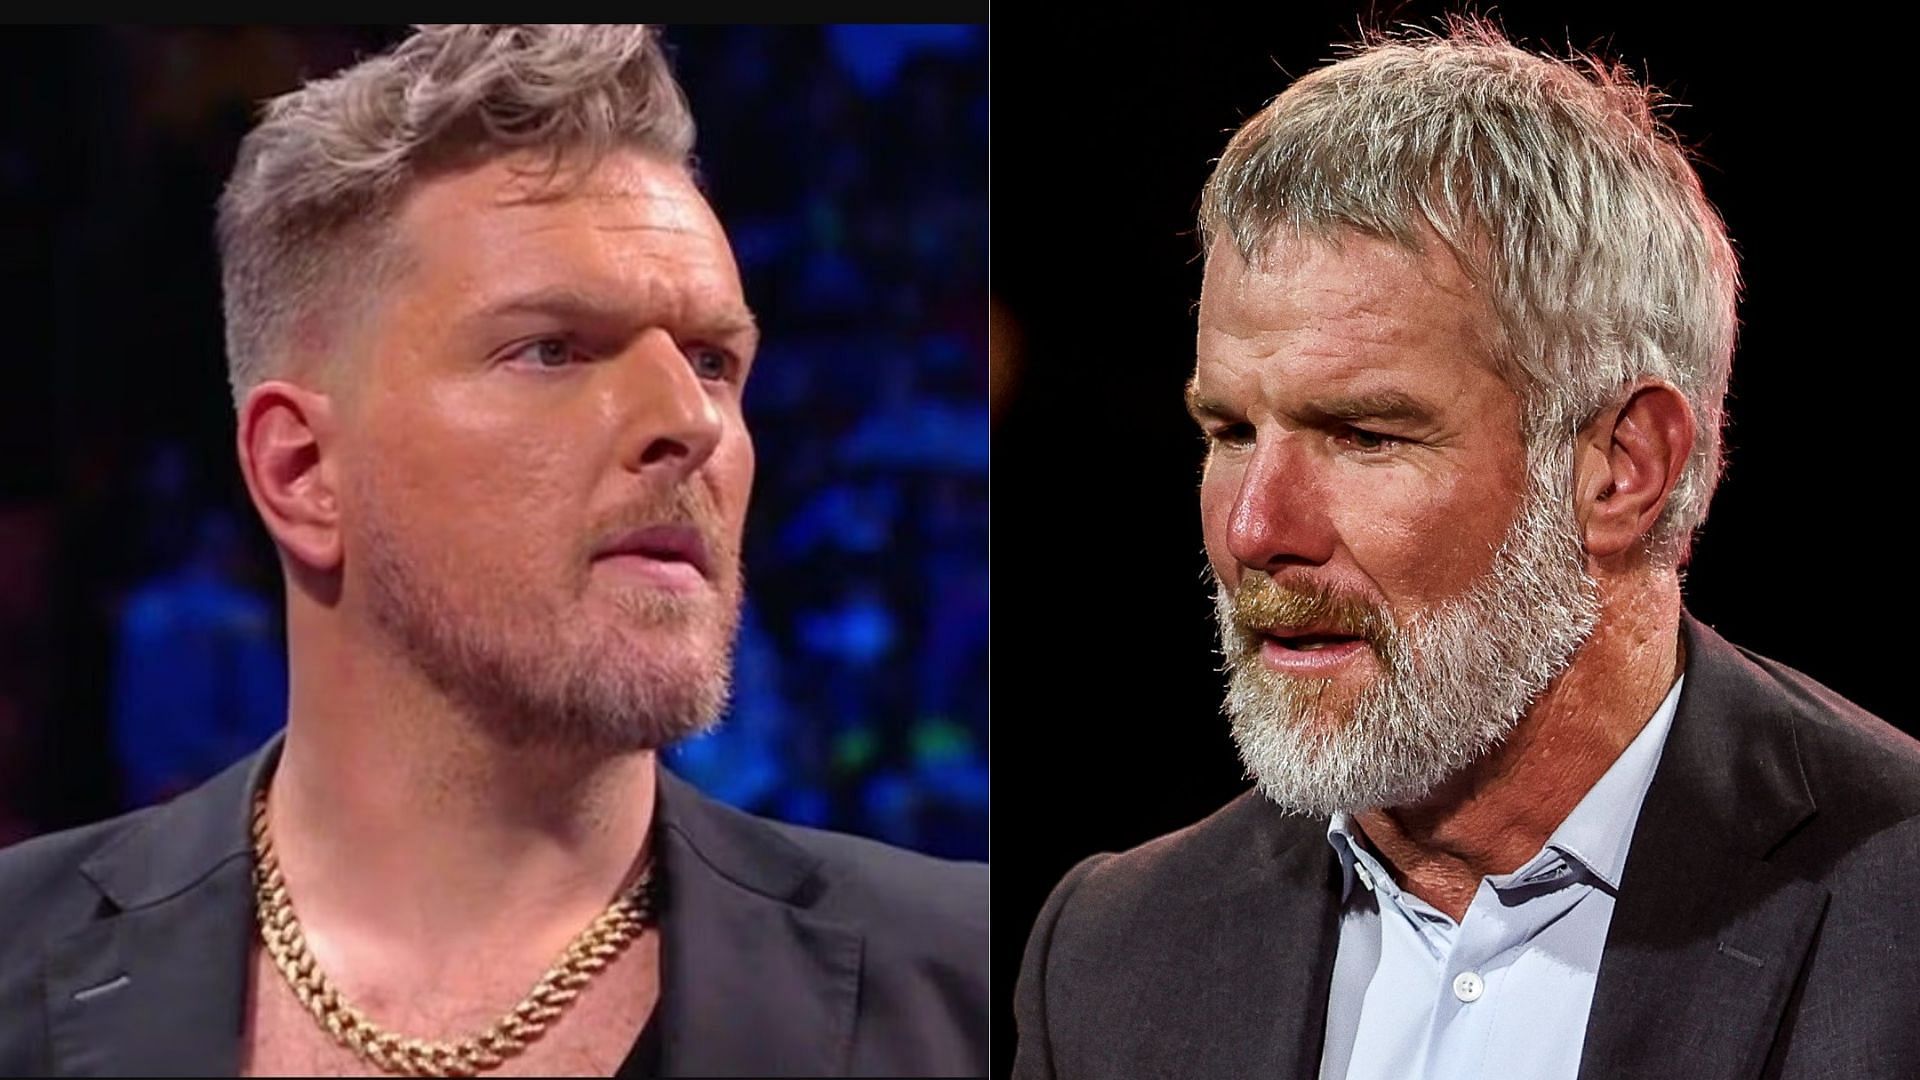 WWE star Pat McAfee lashed out on Brett Favre in his talk show